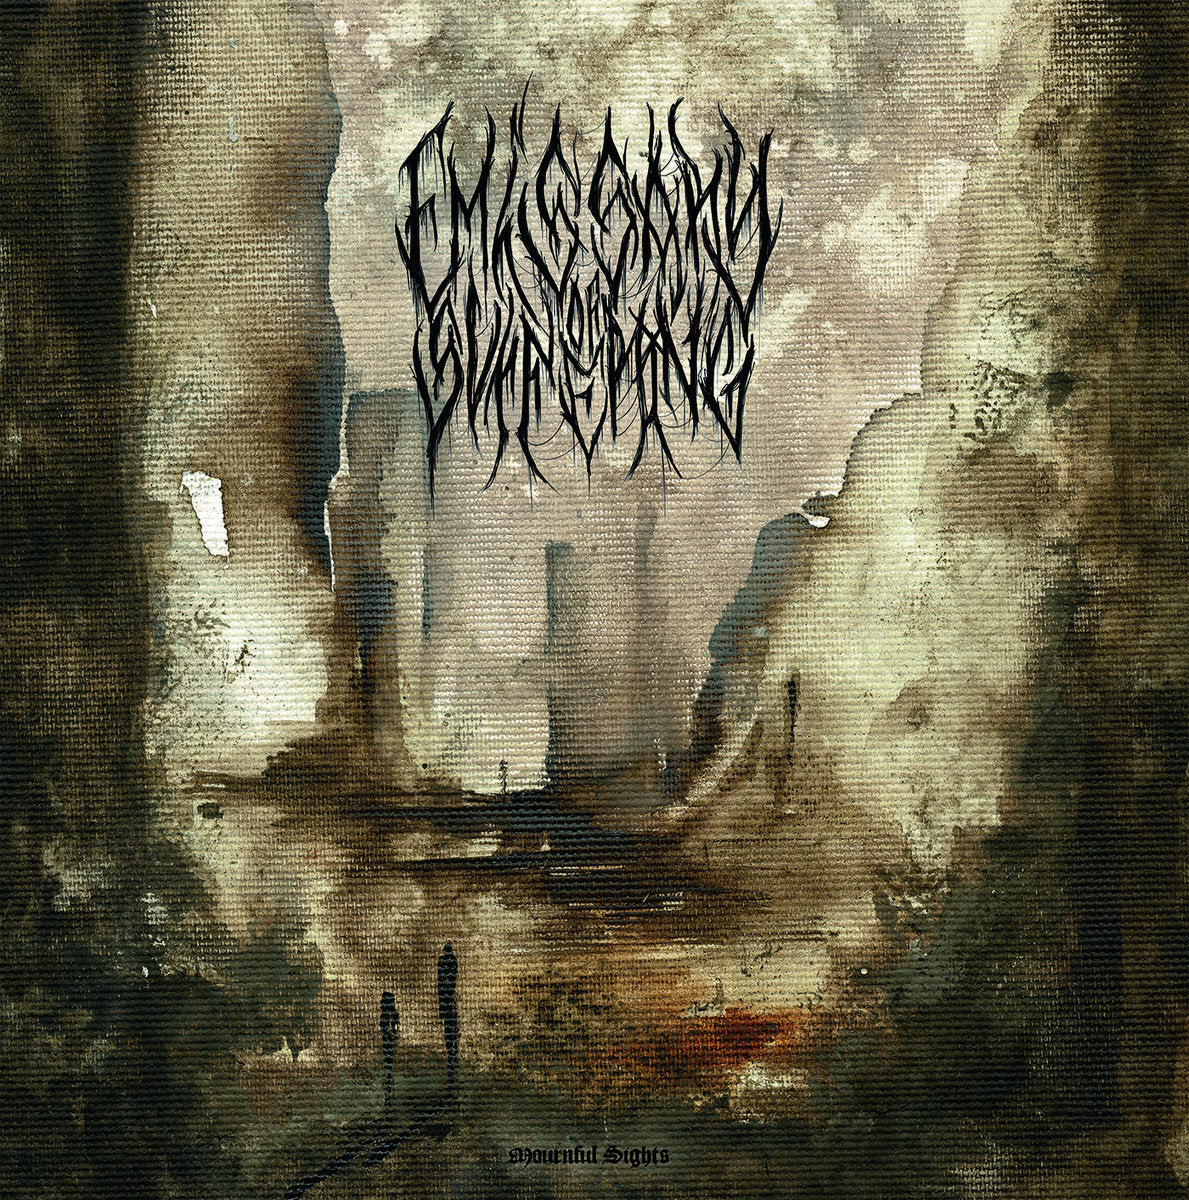 EMISSARY OF SUFFERING • Mournful Sights • LP